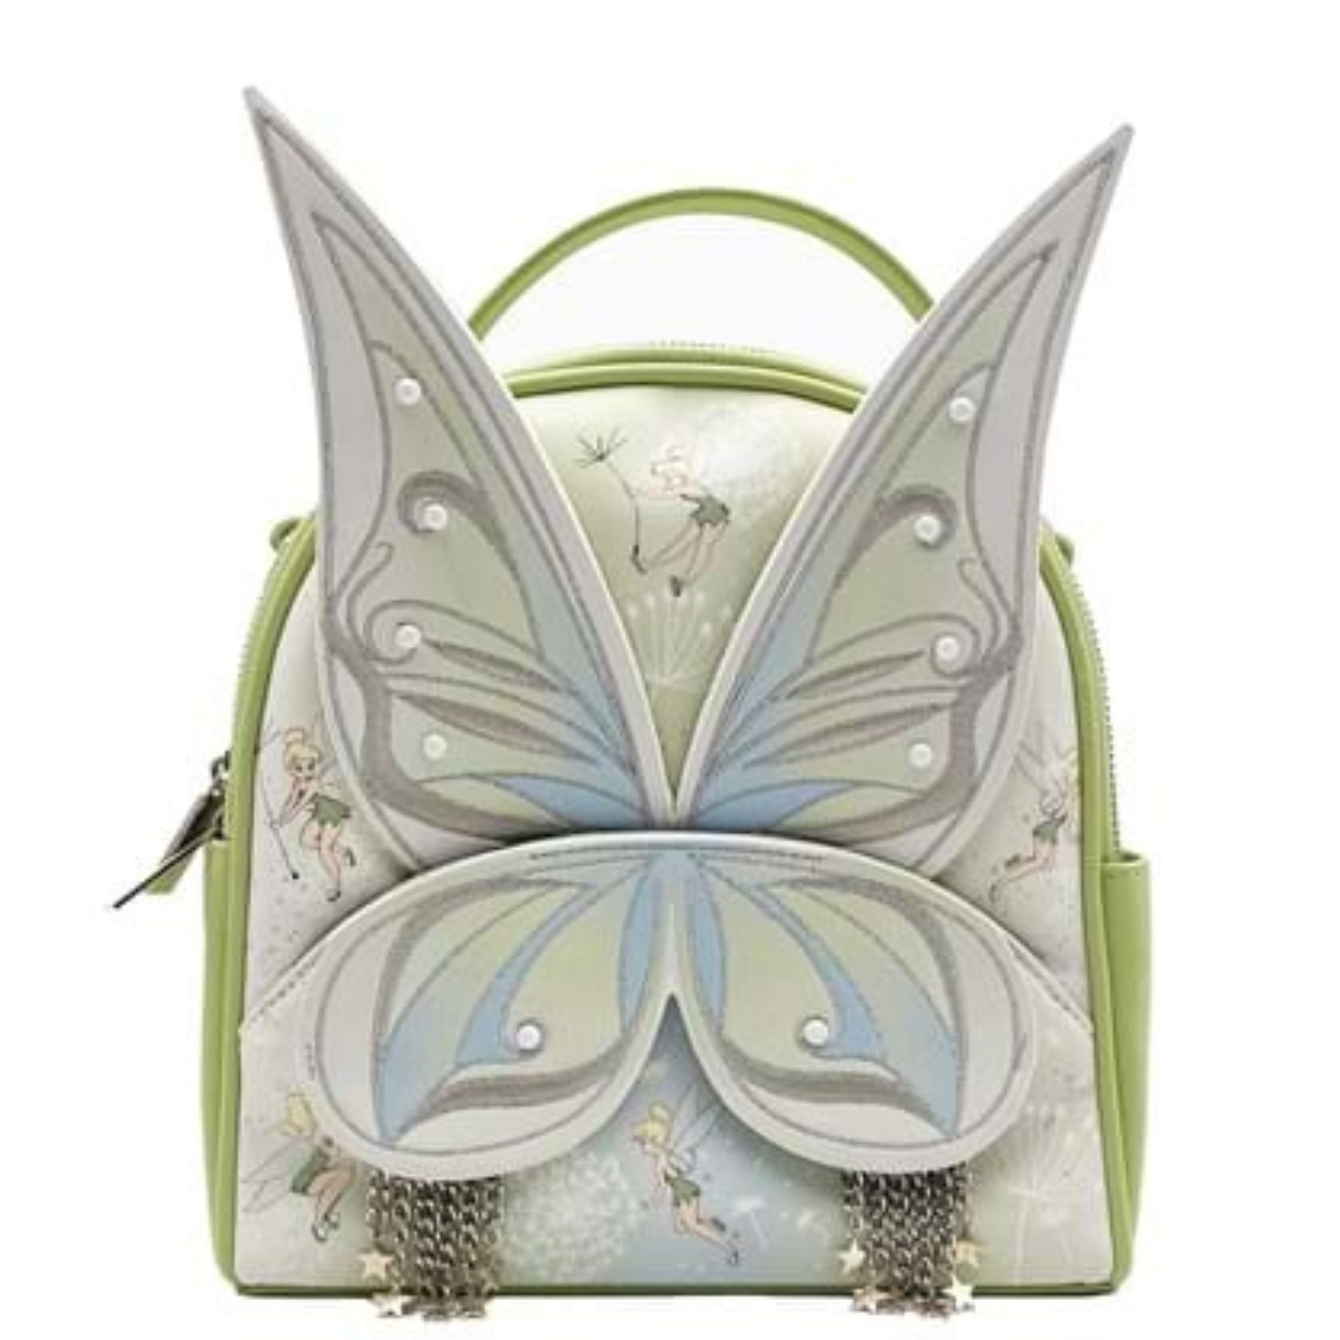 Danielle Nicole Disney Tinker Bell Decorated Wings Backpack